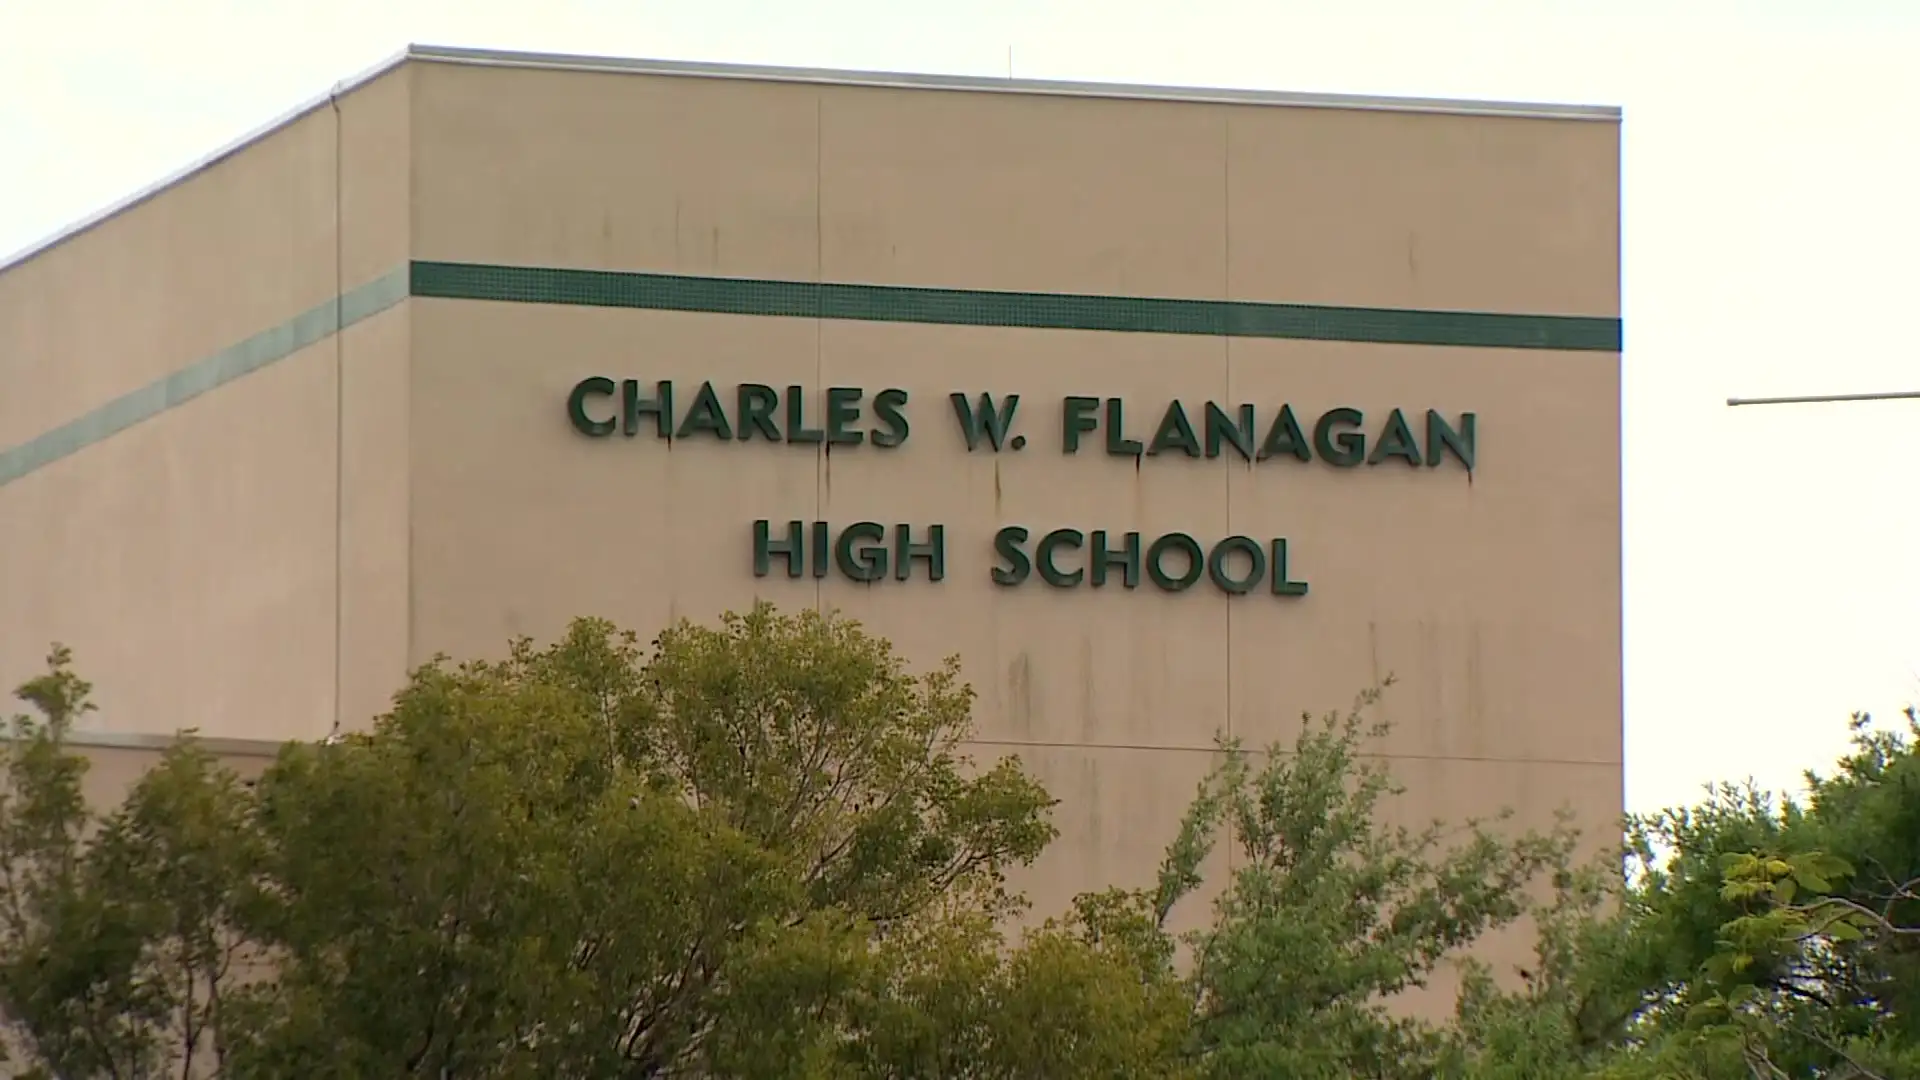 Lockdown lifted at Charles W. Flanagan High School in Pembroke Pines after reports of suspicious phone call - WSVN 7News | Miami News, Weather, Sports | Fort Lauderdale